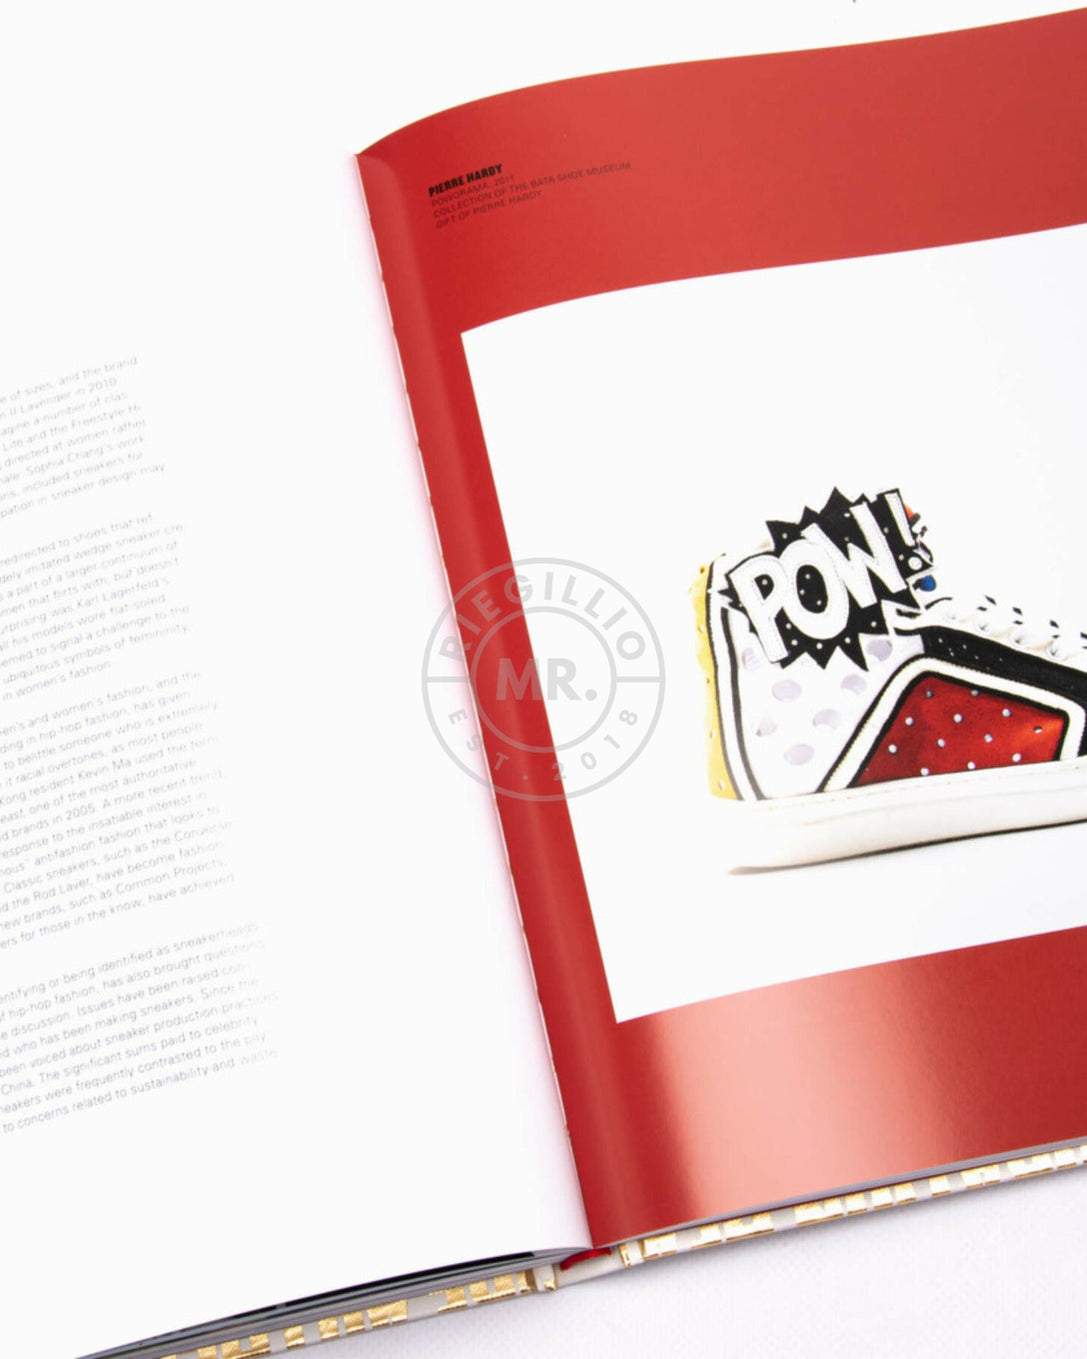 Table Book Out of the box: The rise of the sneaker culture-at MR. Riegillio